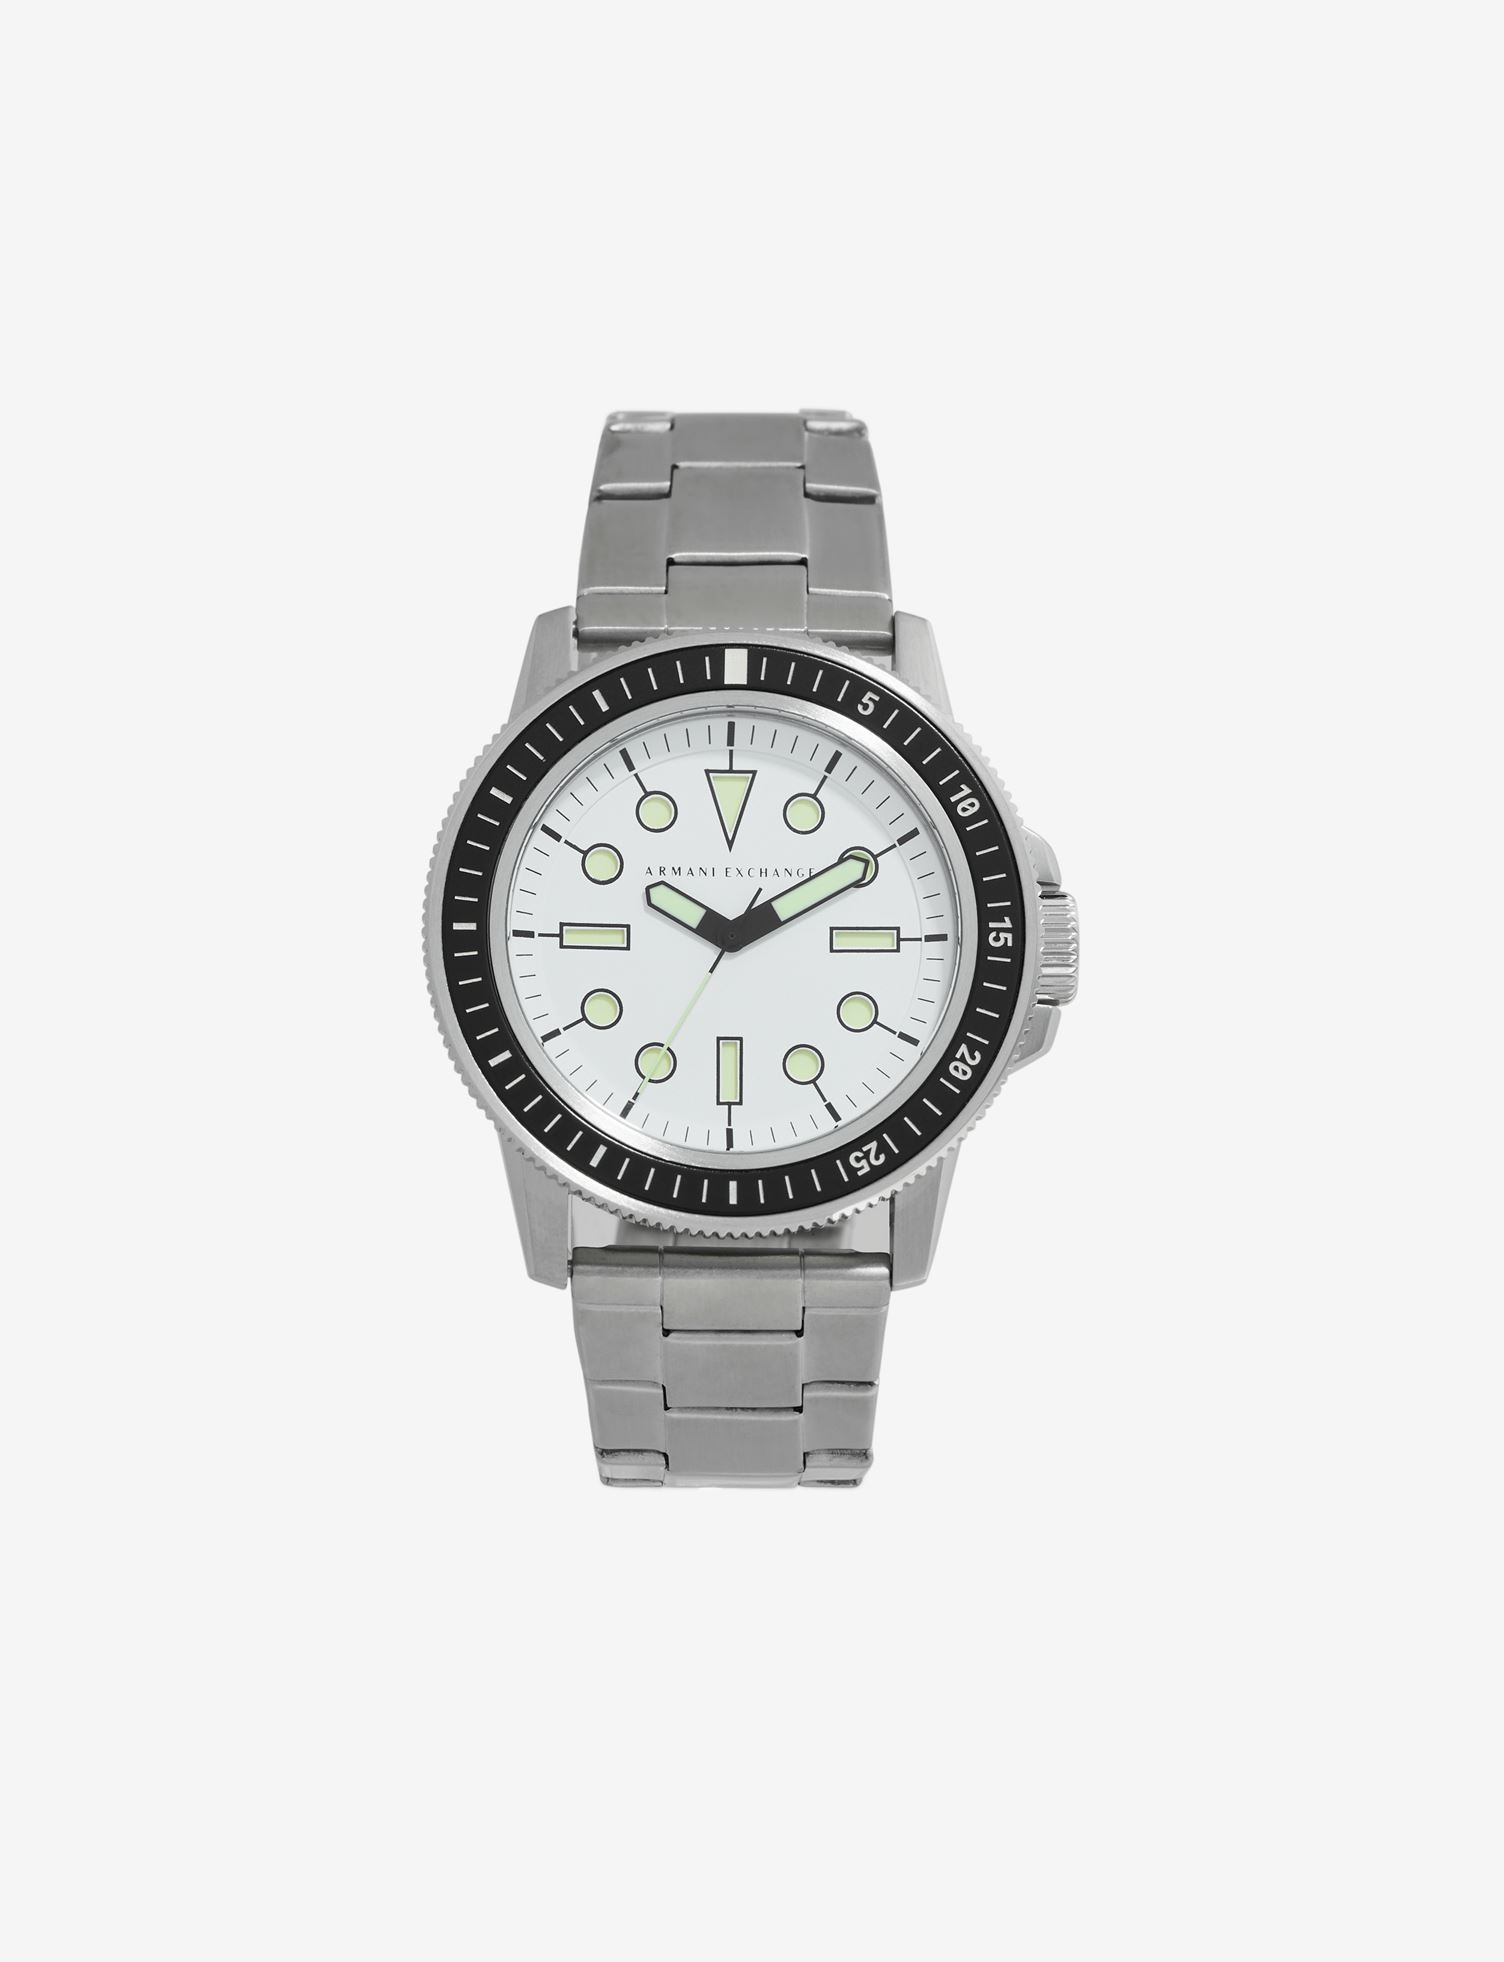 Armani Exchange AX1853 Watch - Tramps the Store